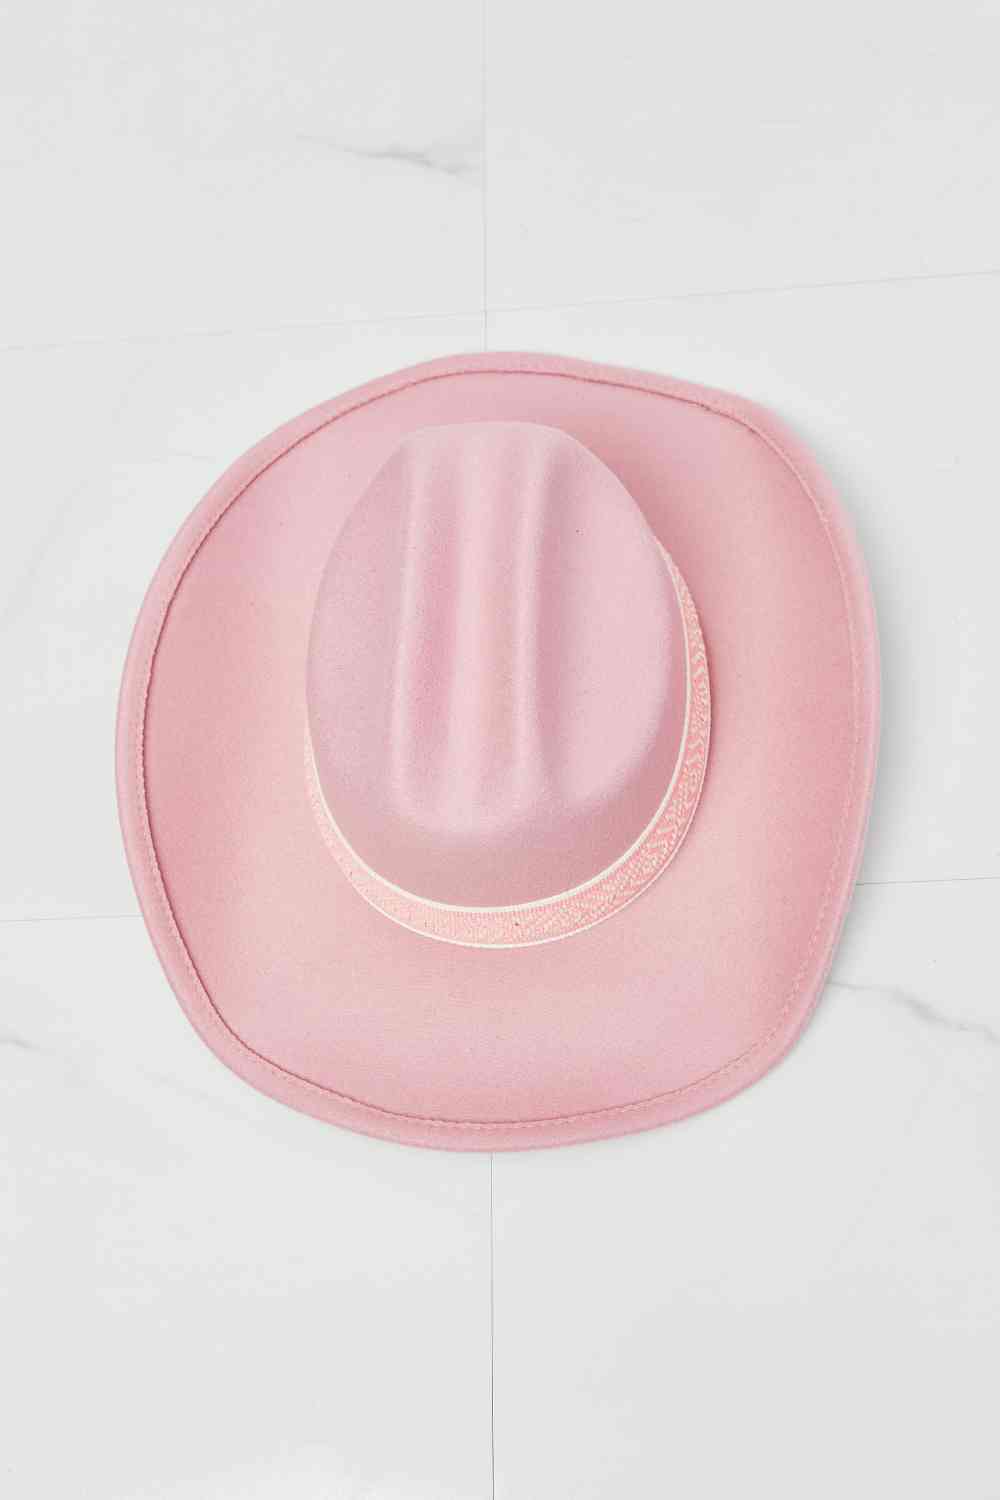 Fame Western Cutie Cowboy Hat in Pink free shipping -Oh Em Gee Boutique